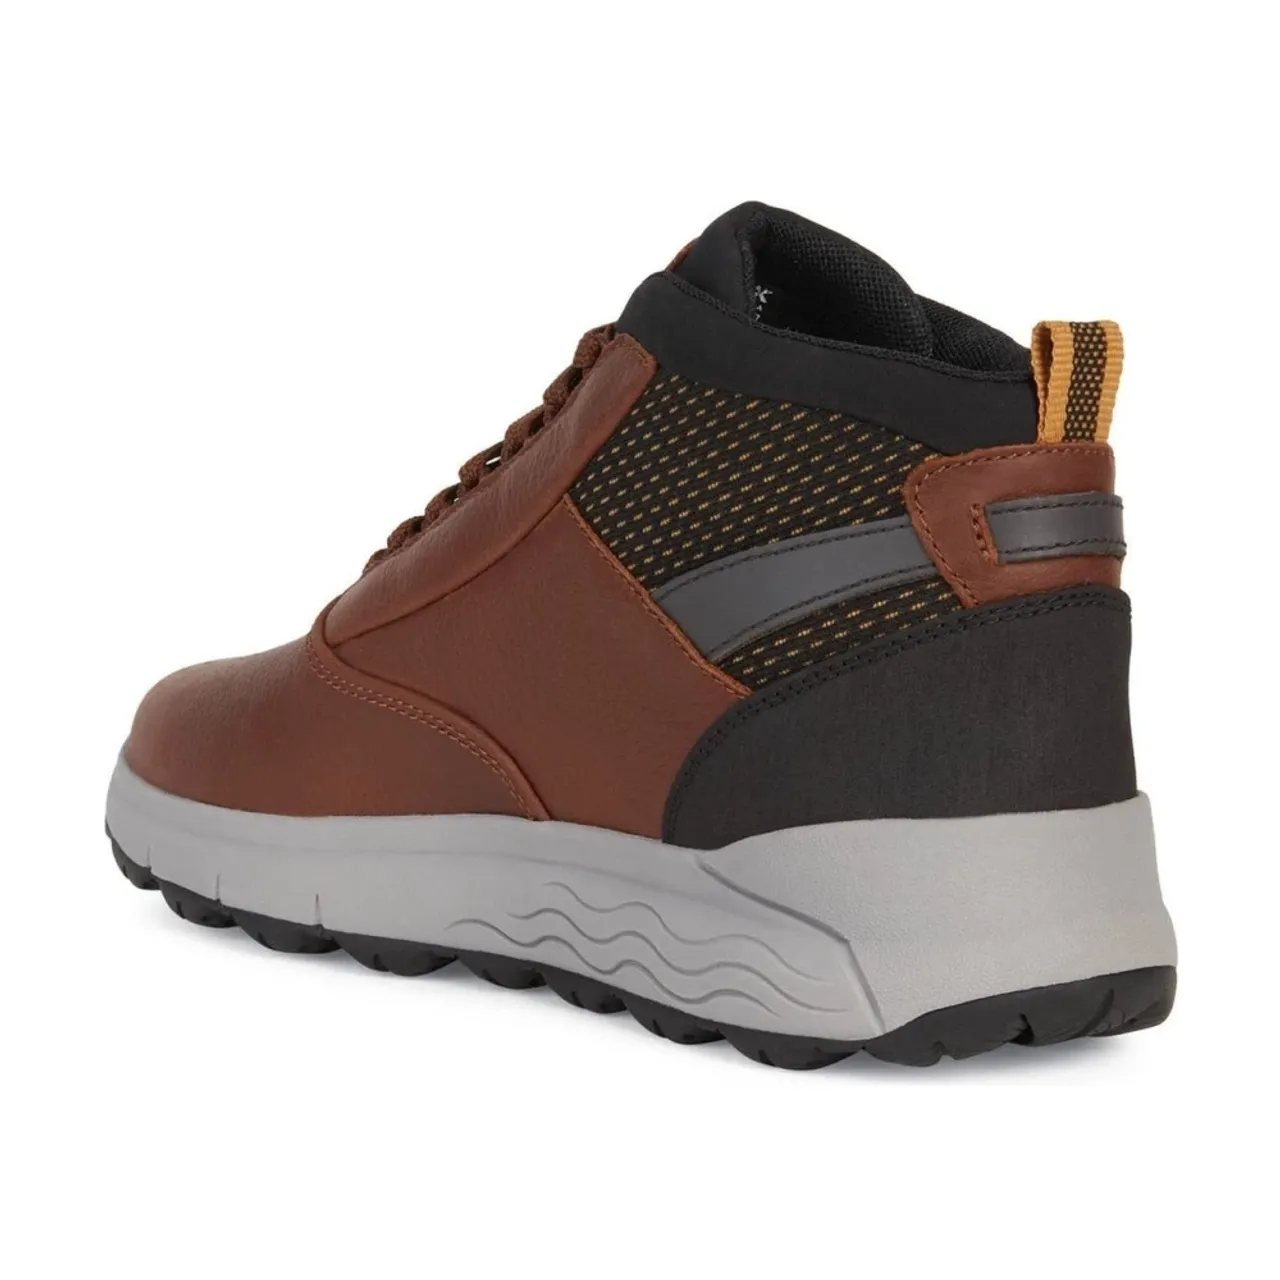 Geox , spherica 4x4 abx booties ,Brown male, Sizes: